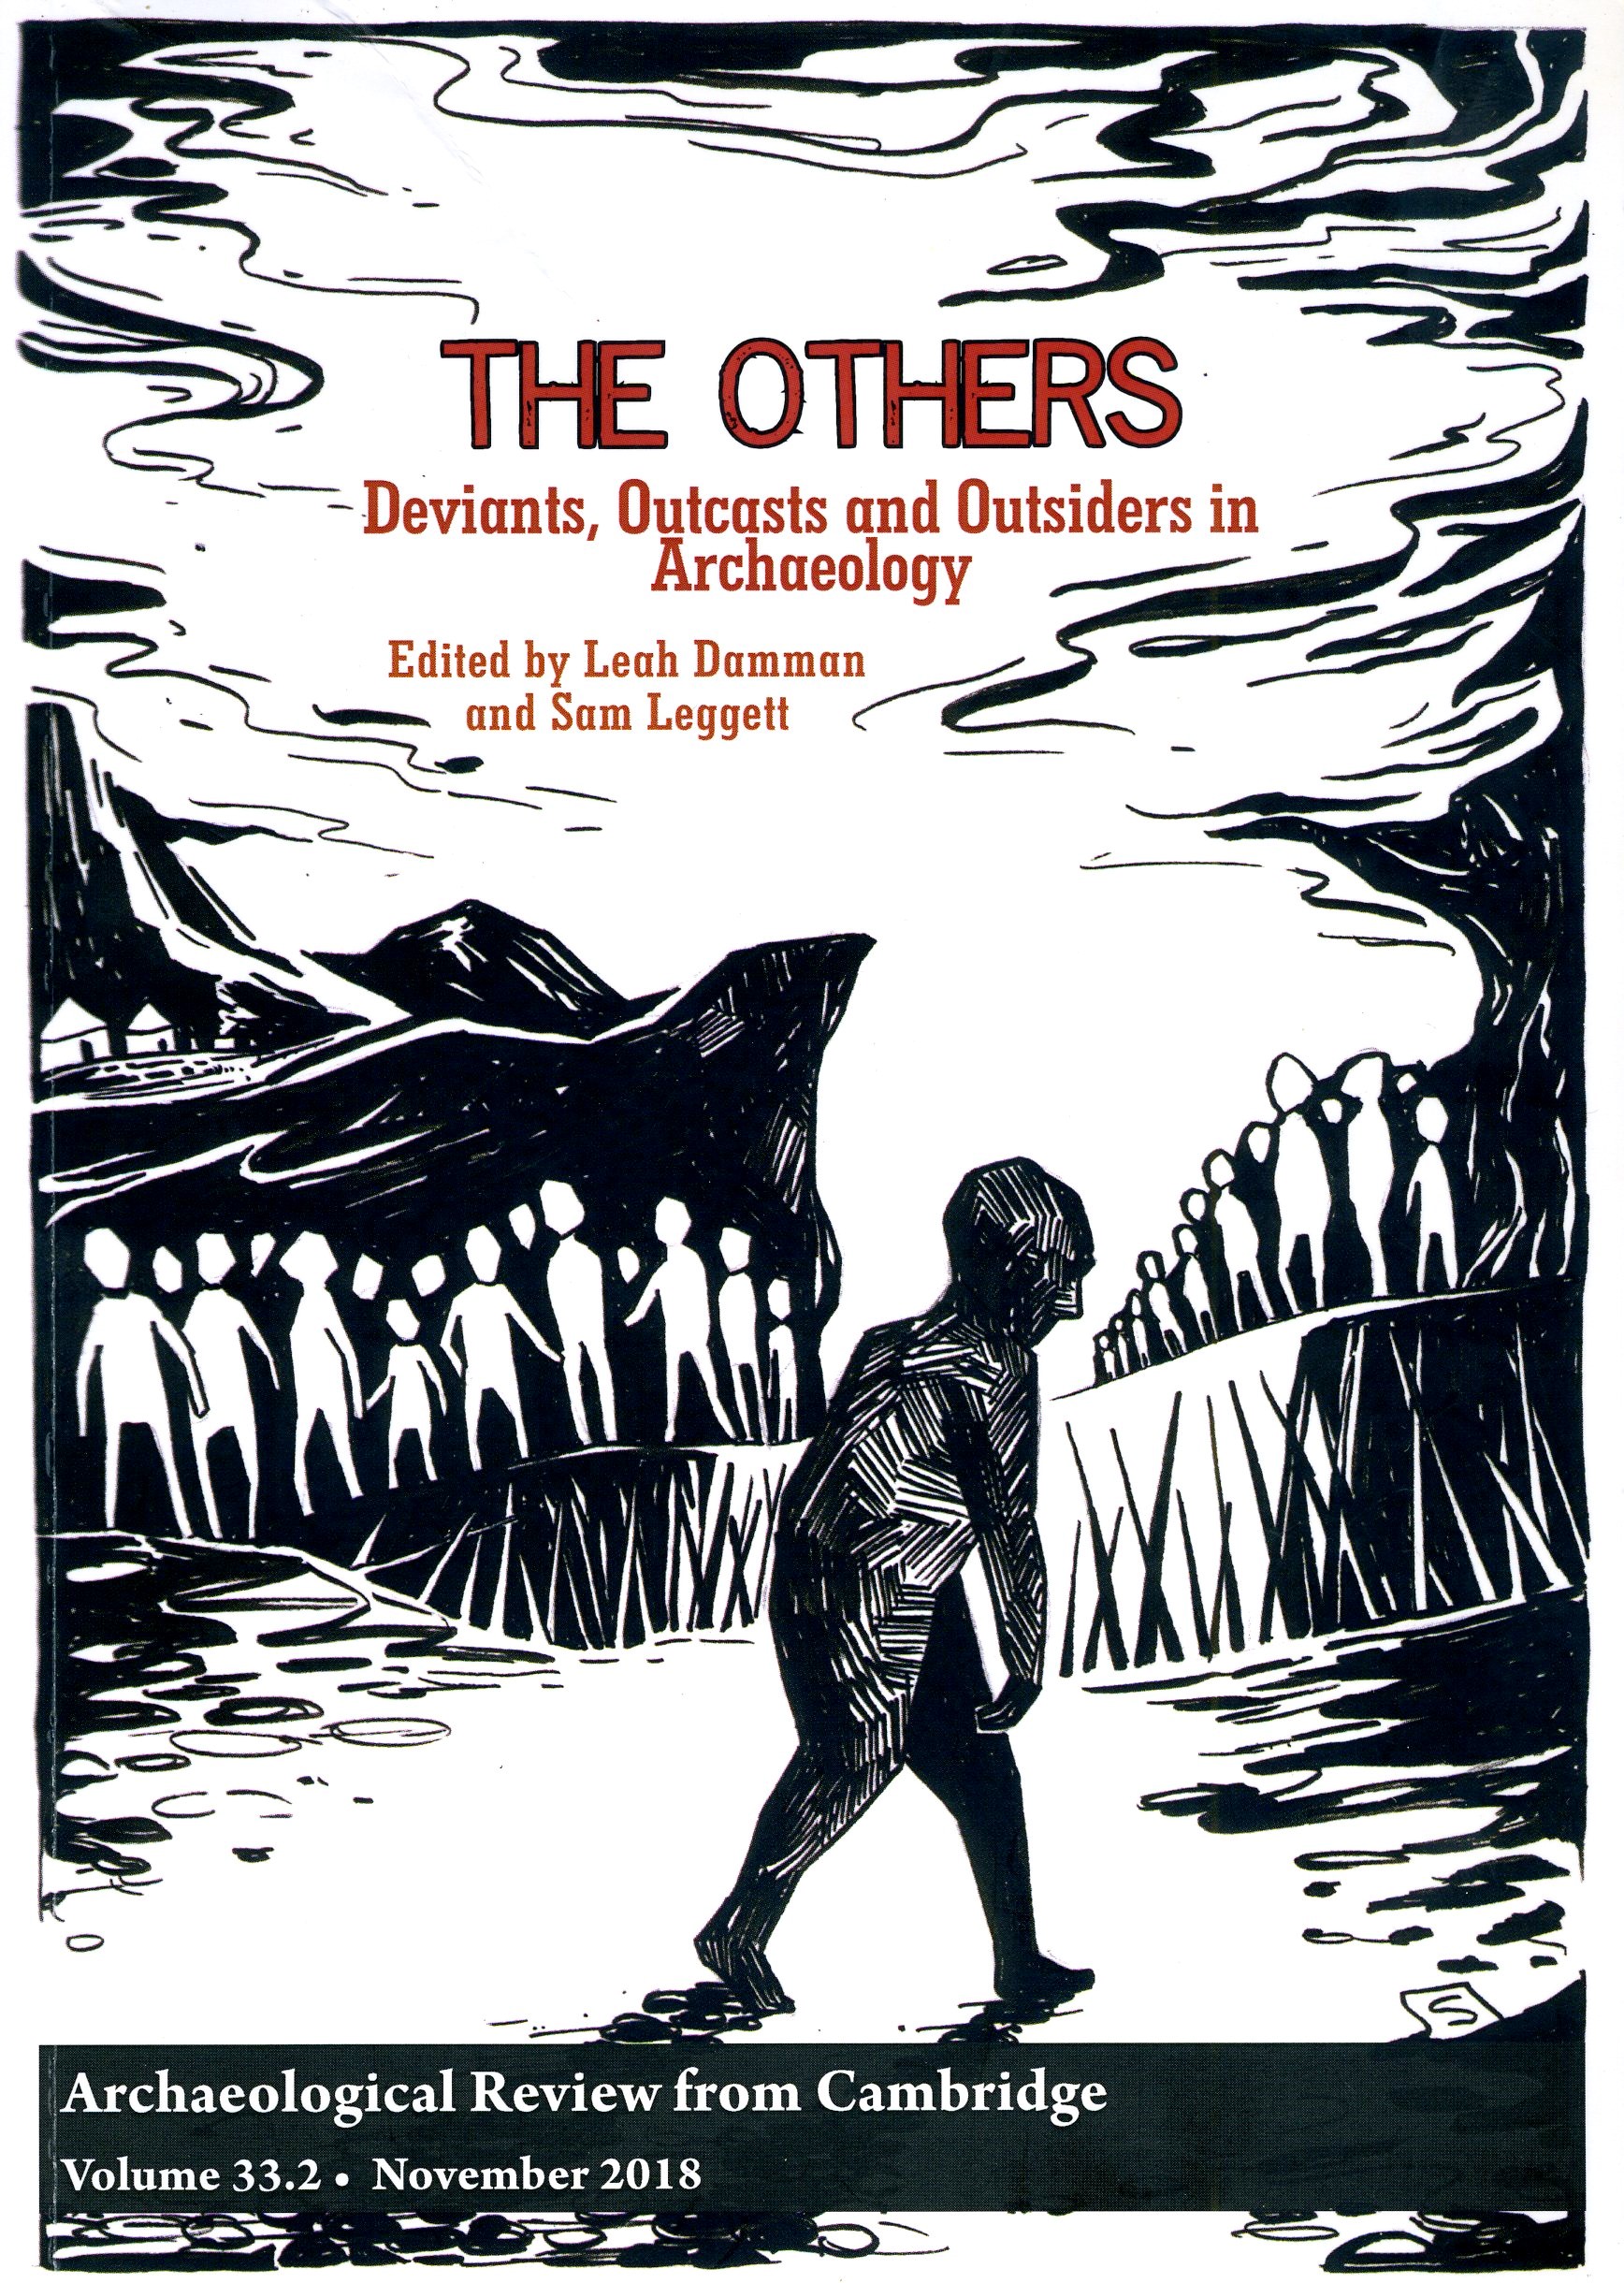 The Others: Deviants, Outcasts and Outsiders in Archaeology